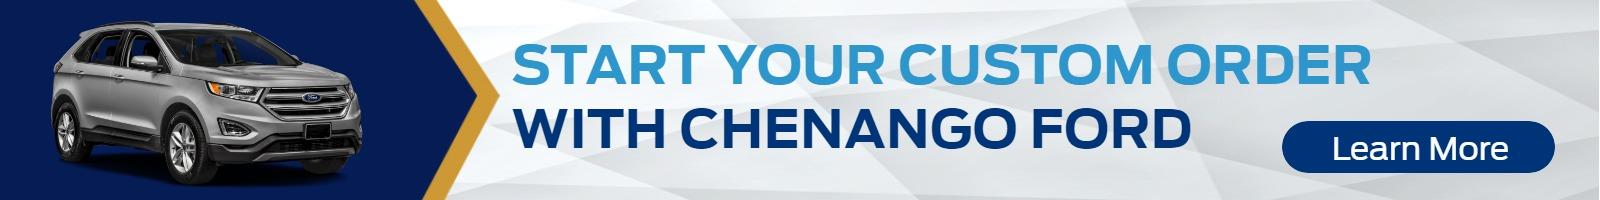 Start Your Custom Order with Chenango Ford